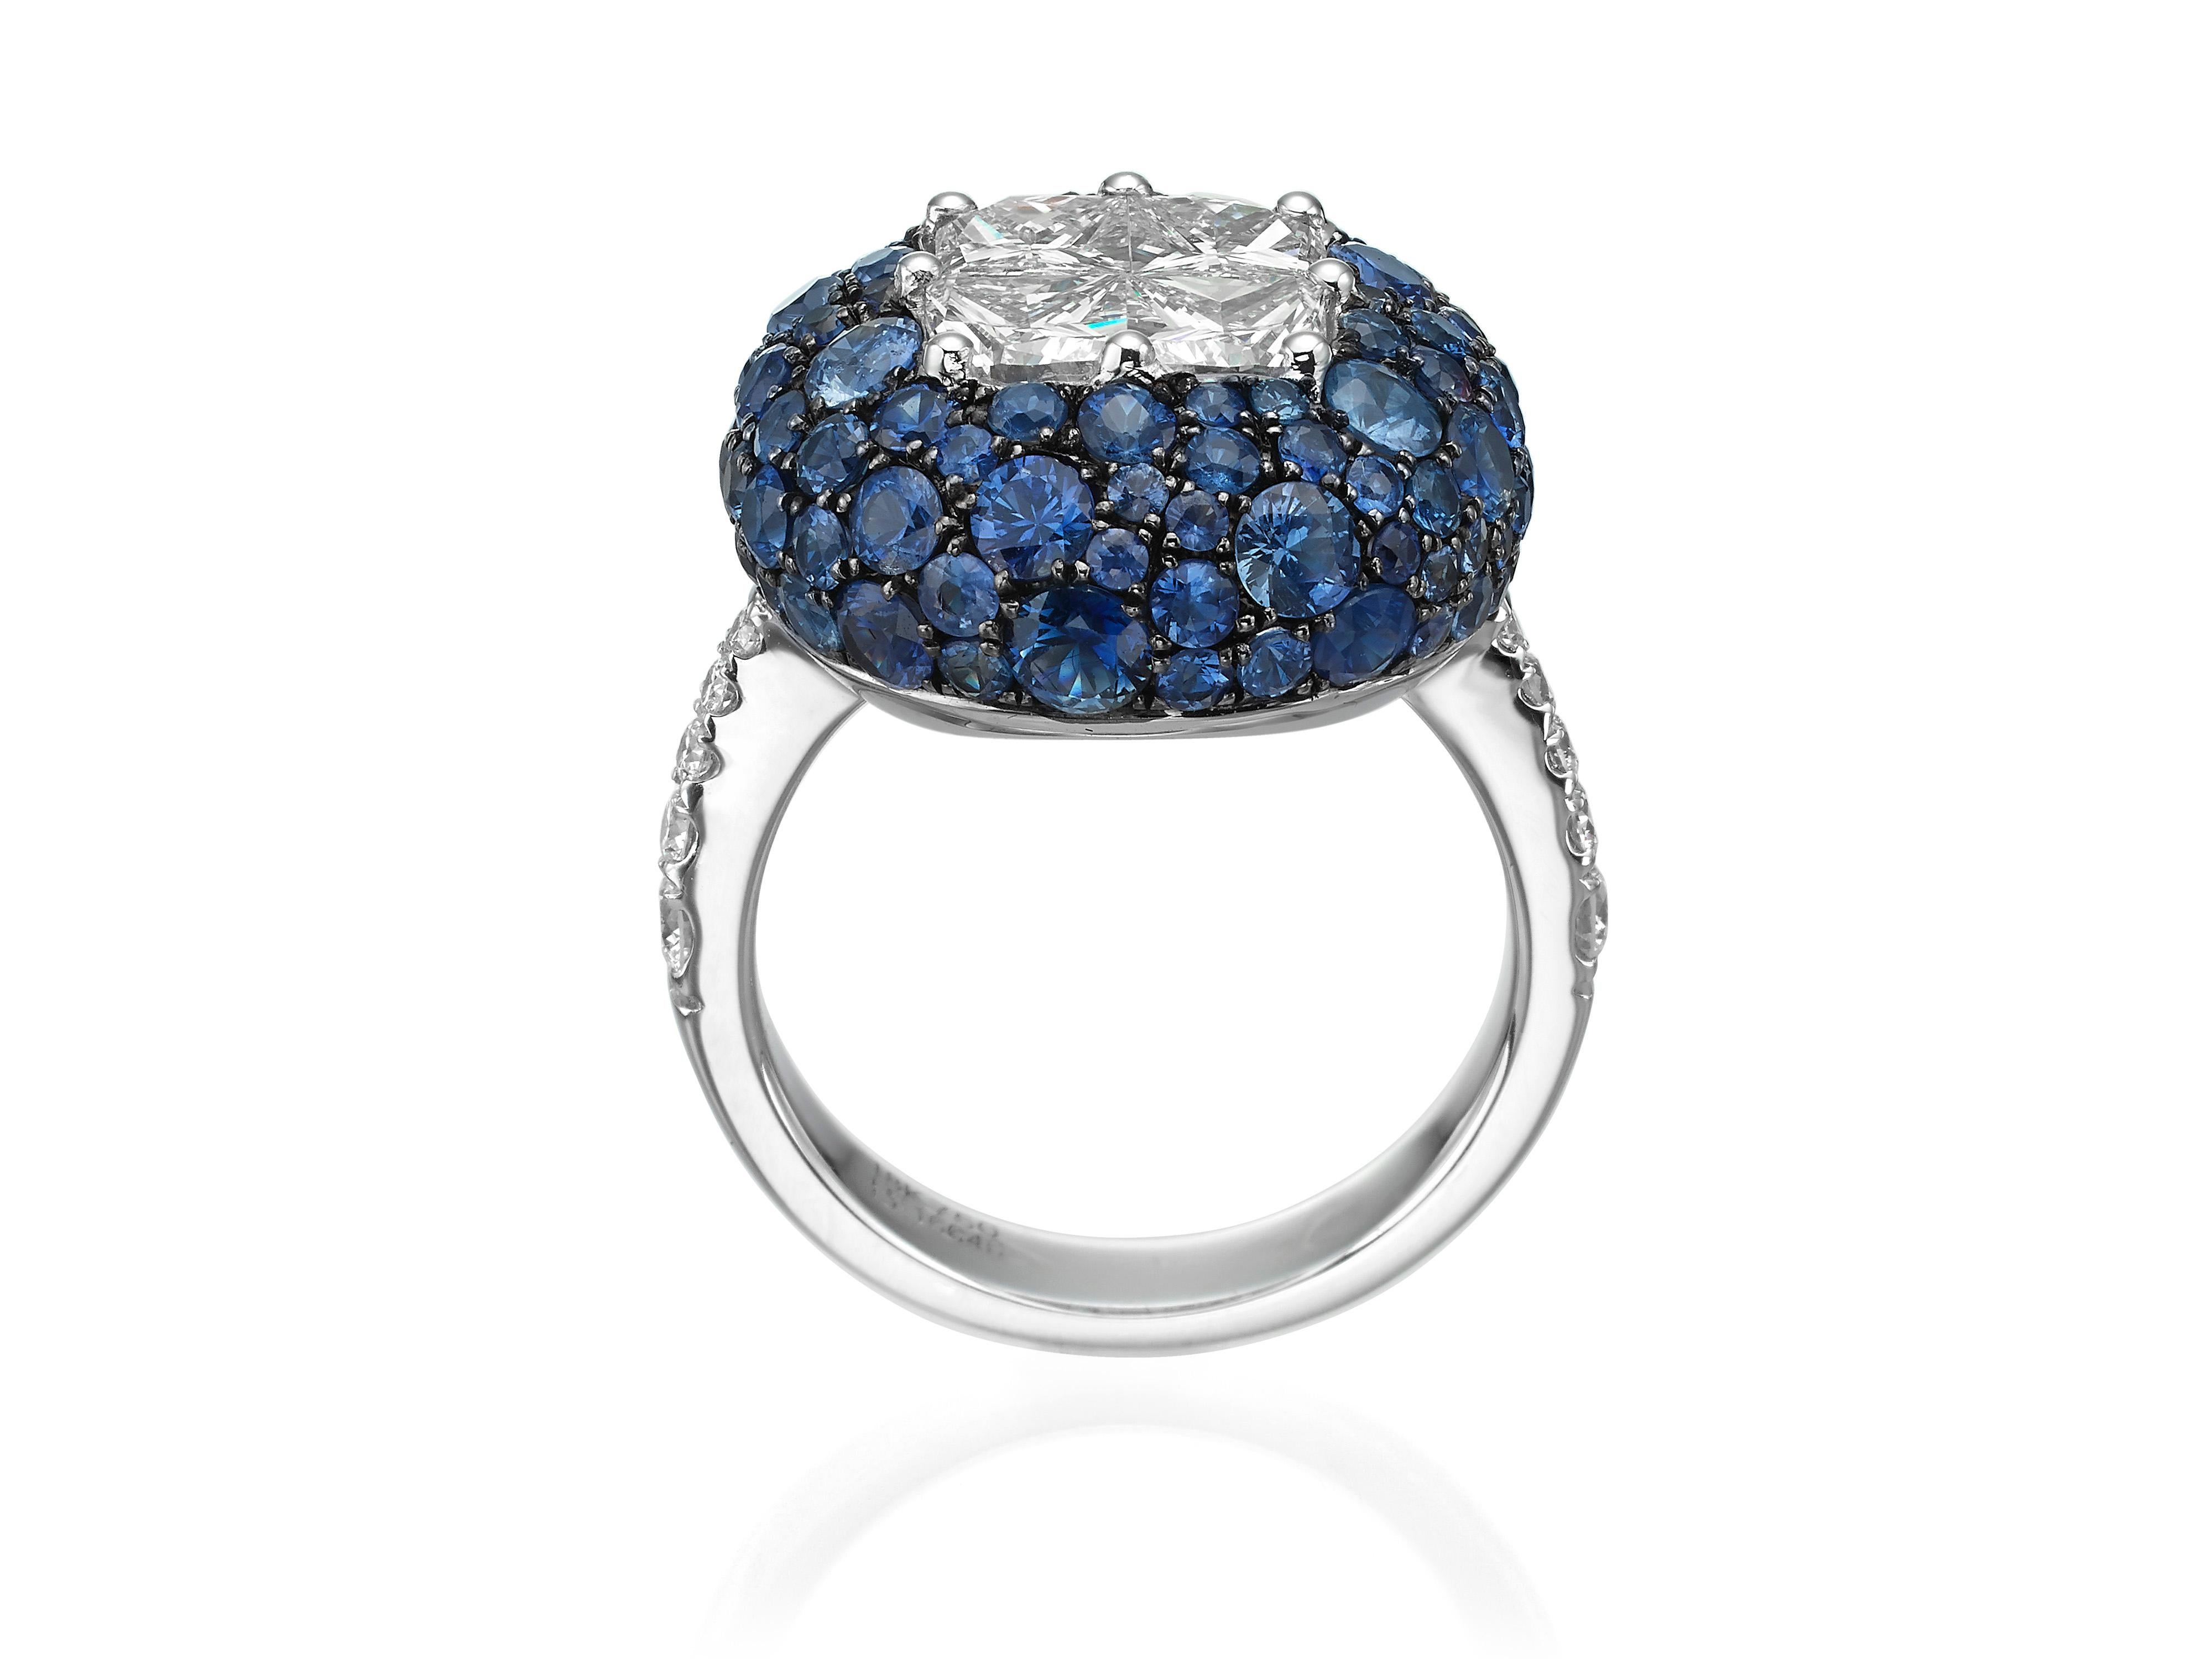 Handcrafted in 18K white gold, this stunning ring is centered with four white diamonds (totaling 1.9 carats) to create an illusion of one large single white diamond.  Surrounded by a cluster of 98 round blue sapphires (totaling 4.05 carats) and 0.29